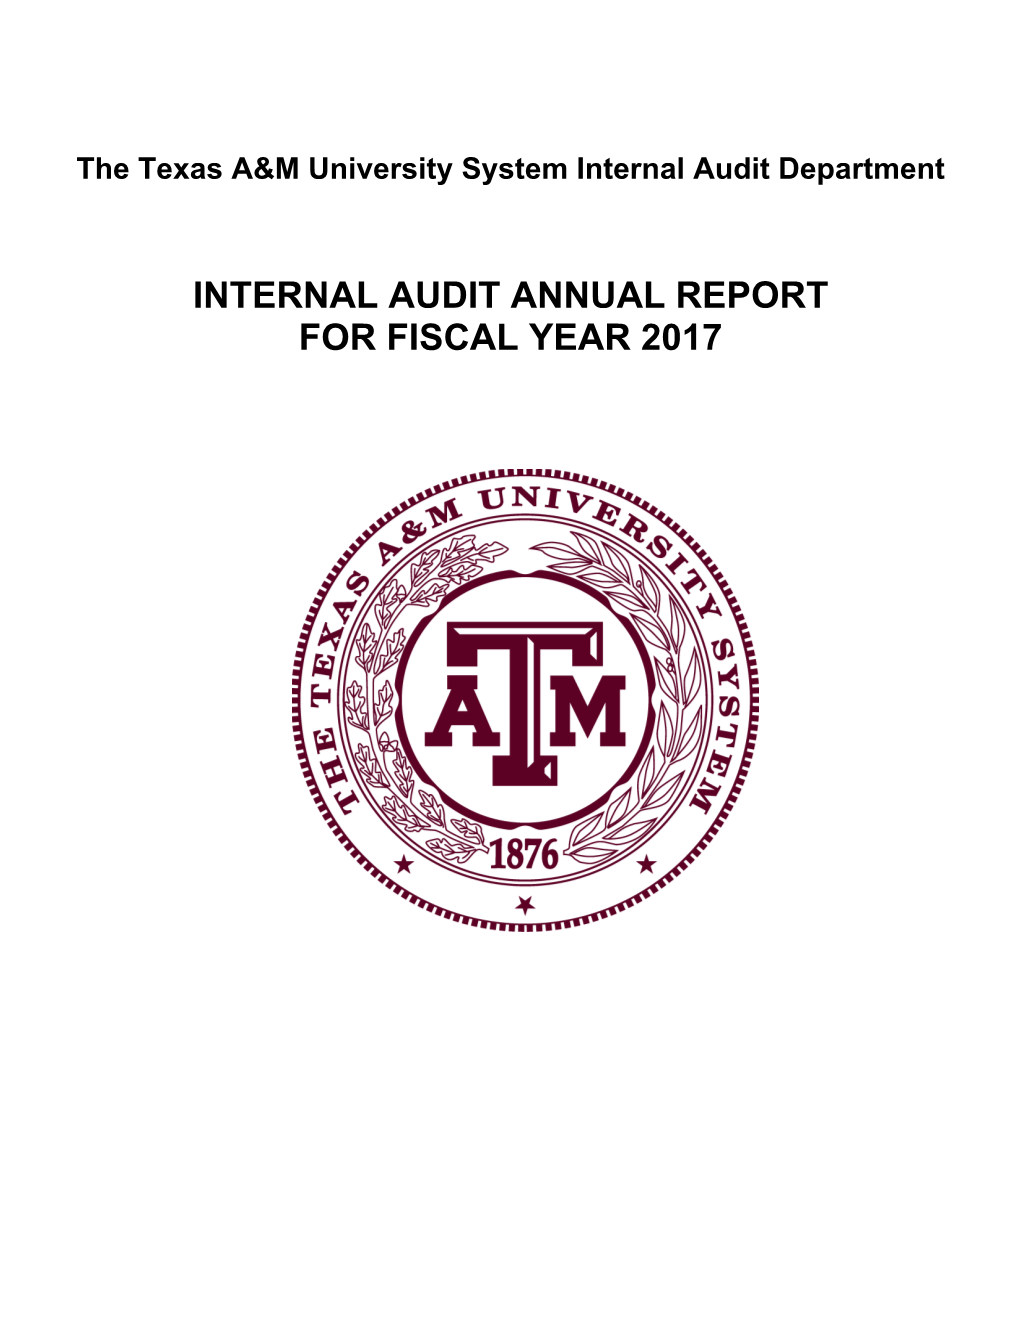 INTERNAL AUDIT ANNUAL REPORT for FISCAL YEAR 2017 the Texas A&M University System Internal Audit Annual Report for Fiscal Year 2017